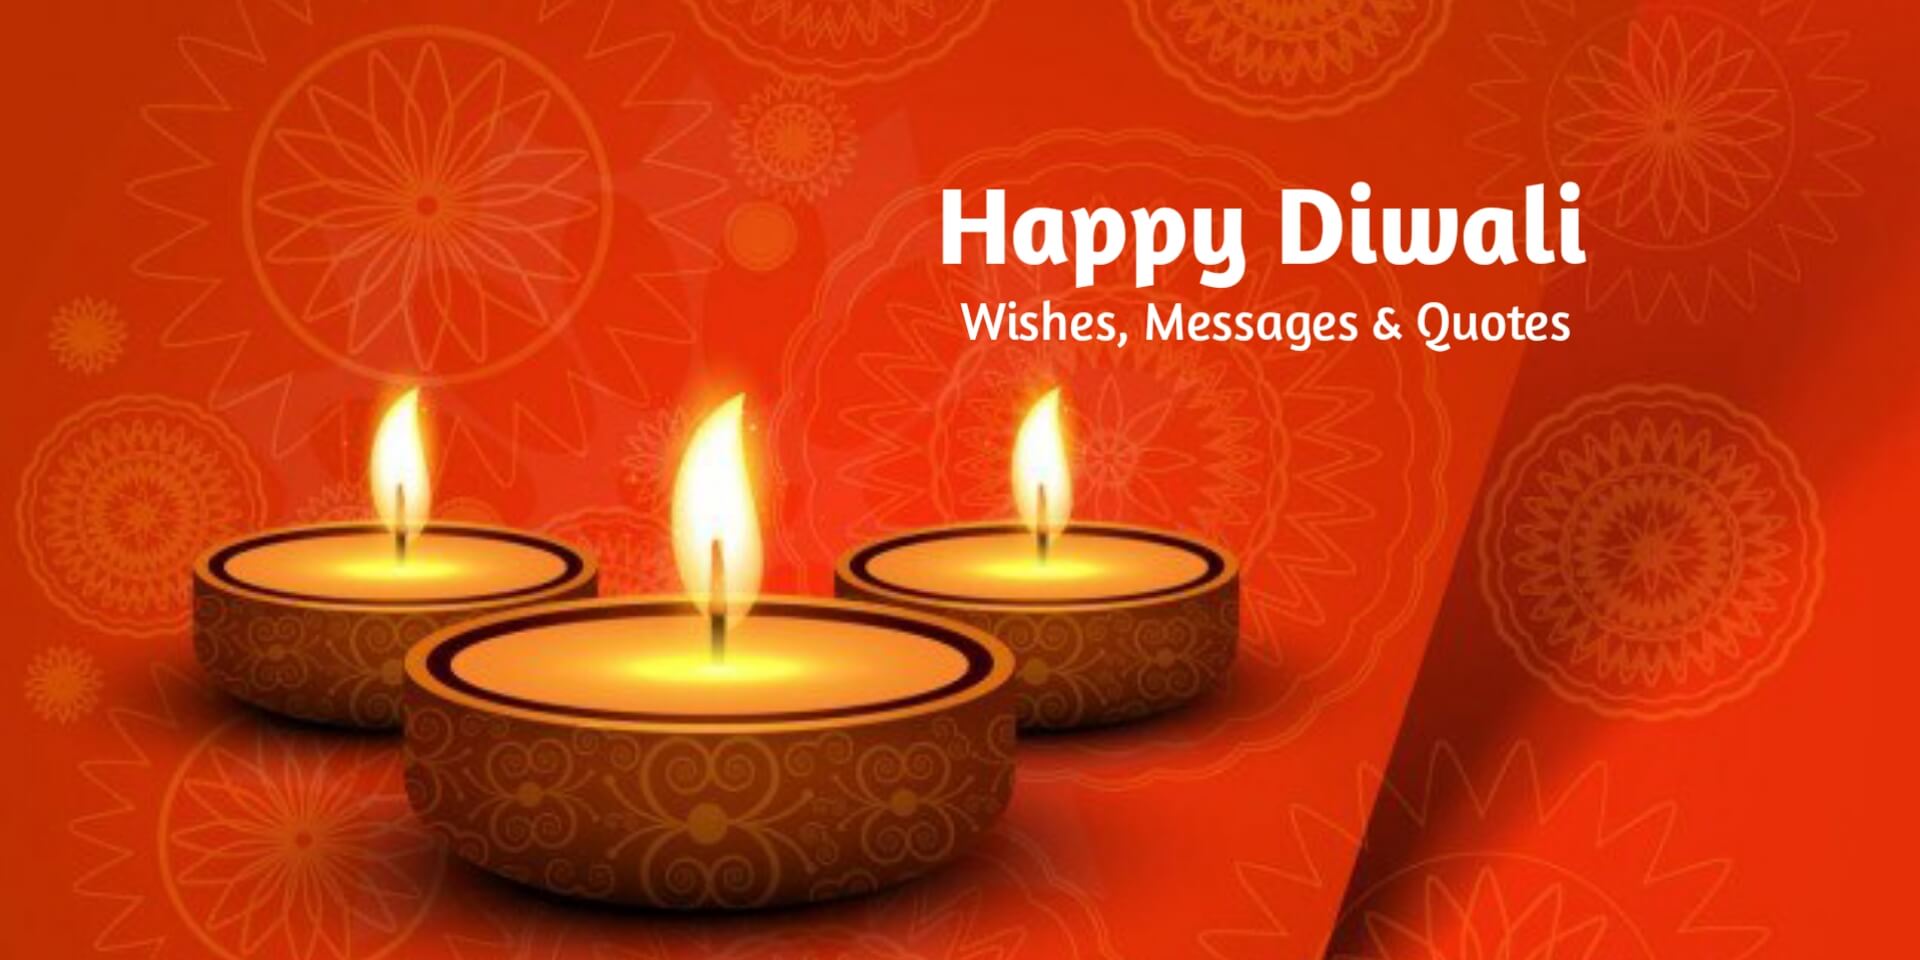 Happy diwali message and wishes 